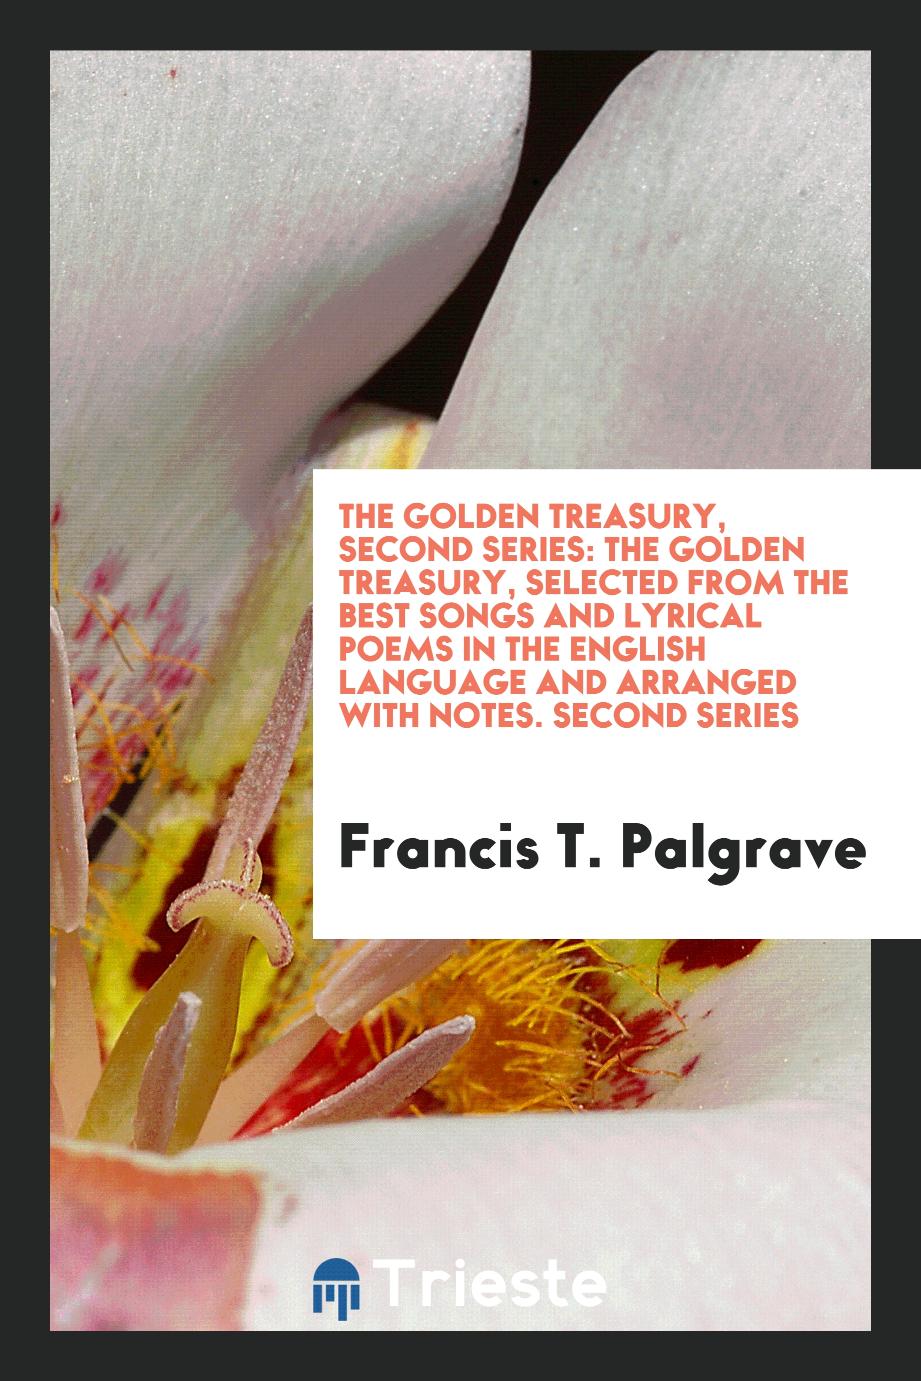 The Golden Treasury, Second Series: The Golden Treasury, Selected from the Best Songs and Lyrical Poems in the English Language and Arranged with Notes. Second Series